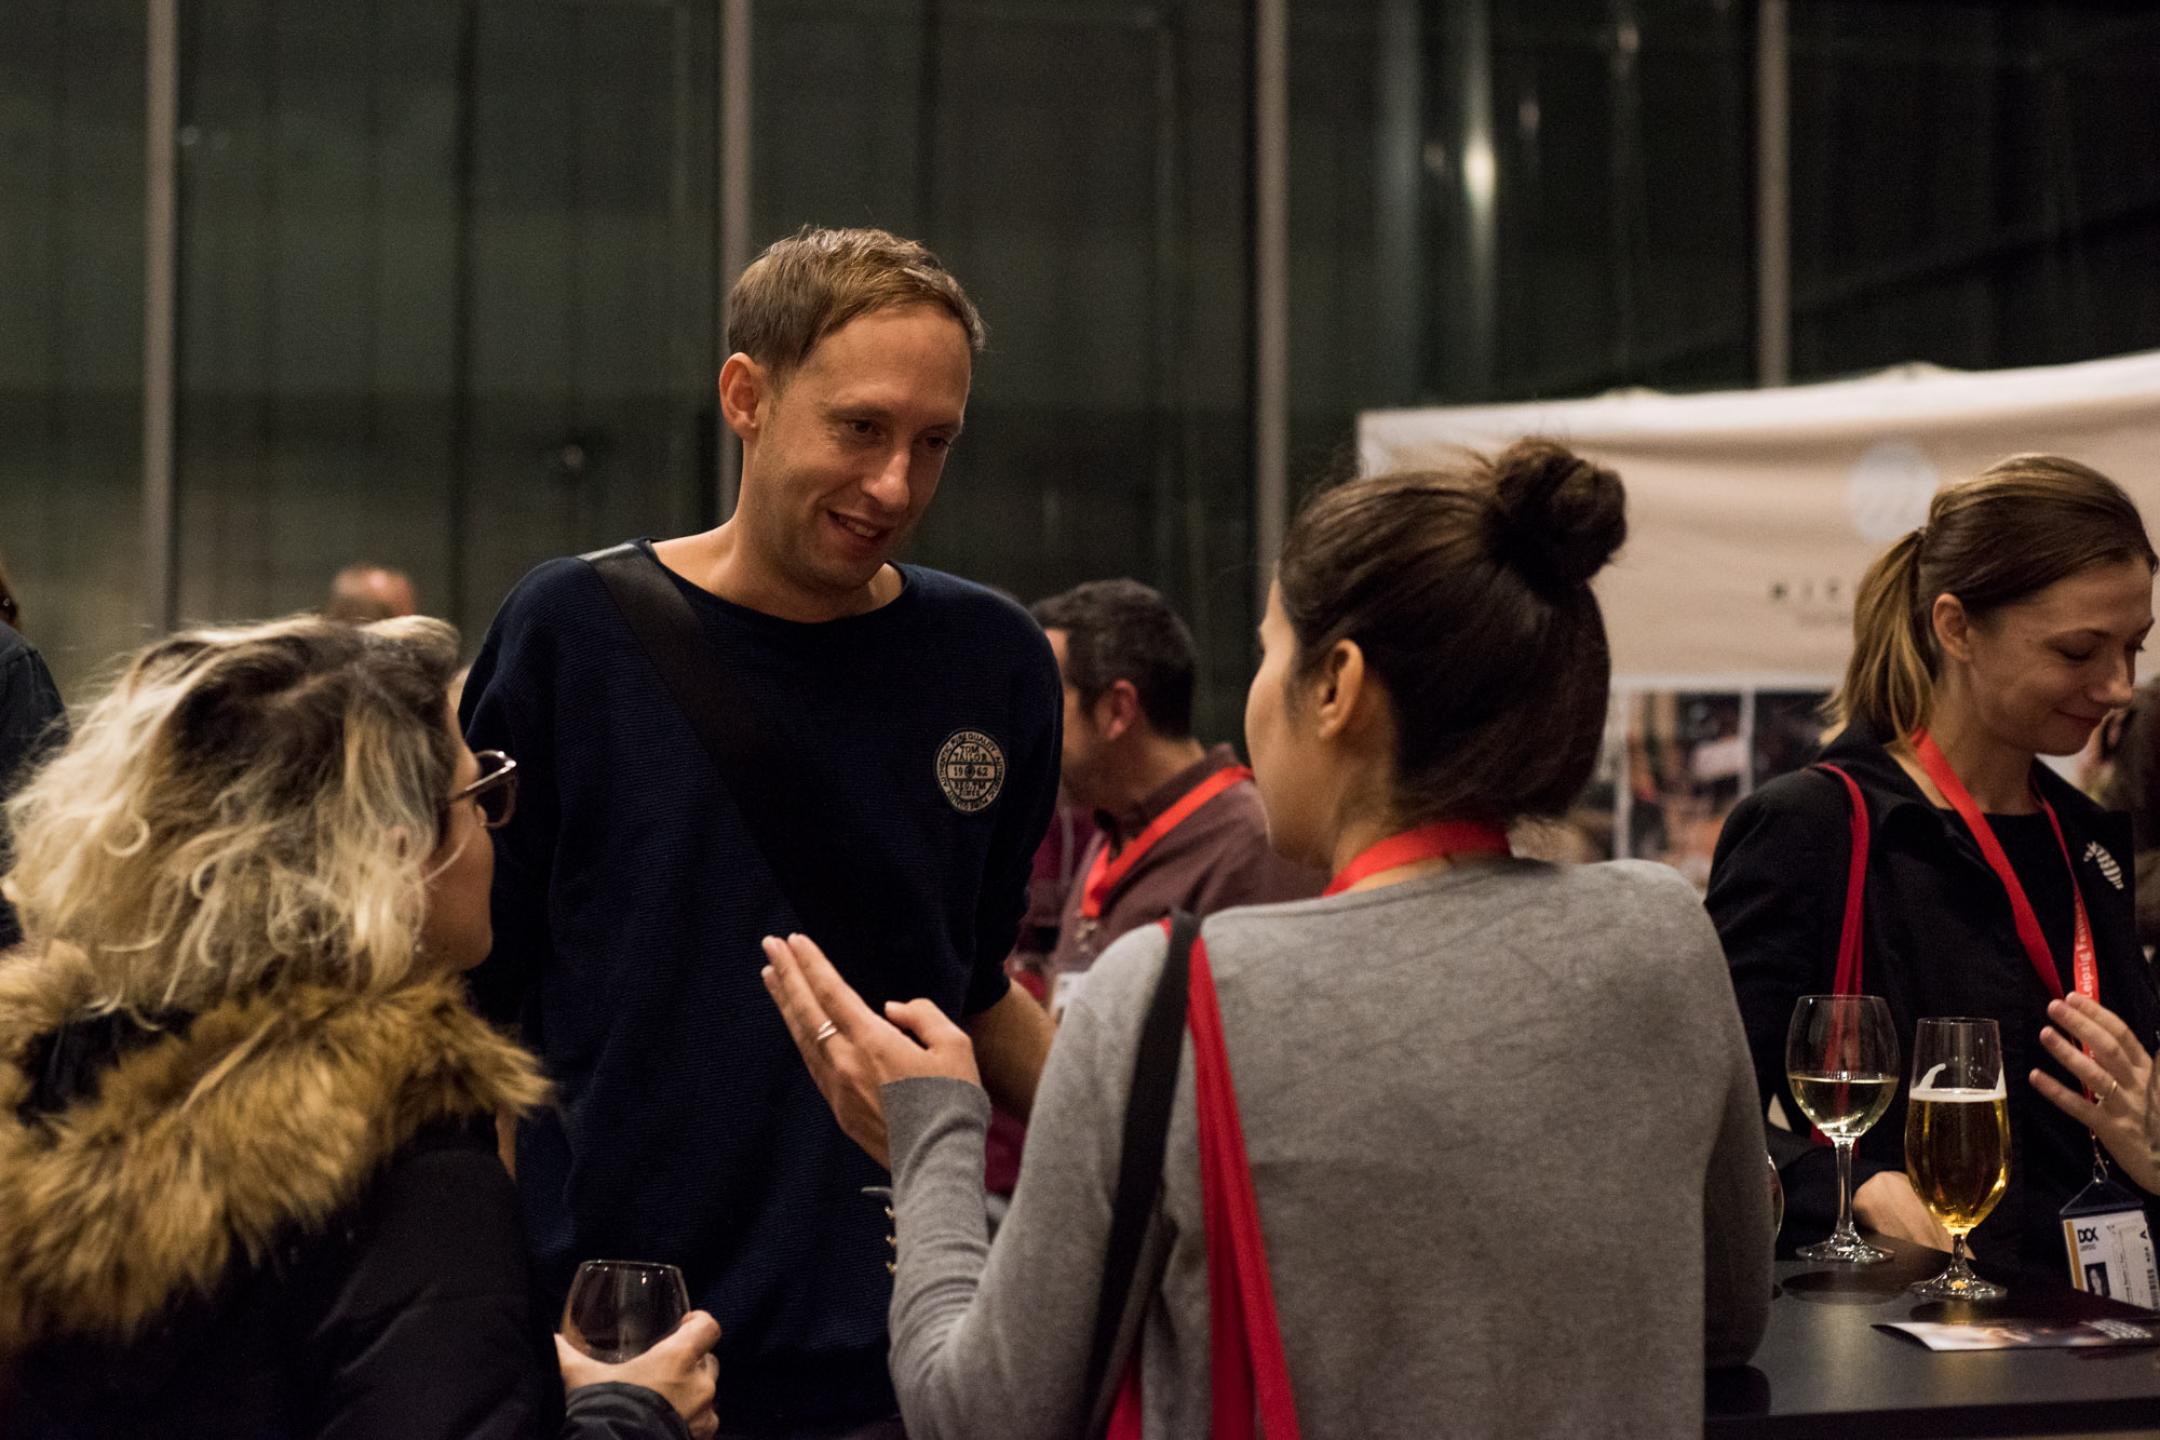 An evening event at the festival center at MdbK Leipzig: Selection Committee member Daniel Abma is talking to two women. 